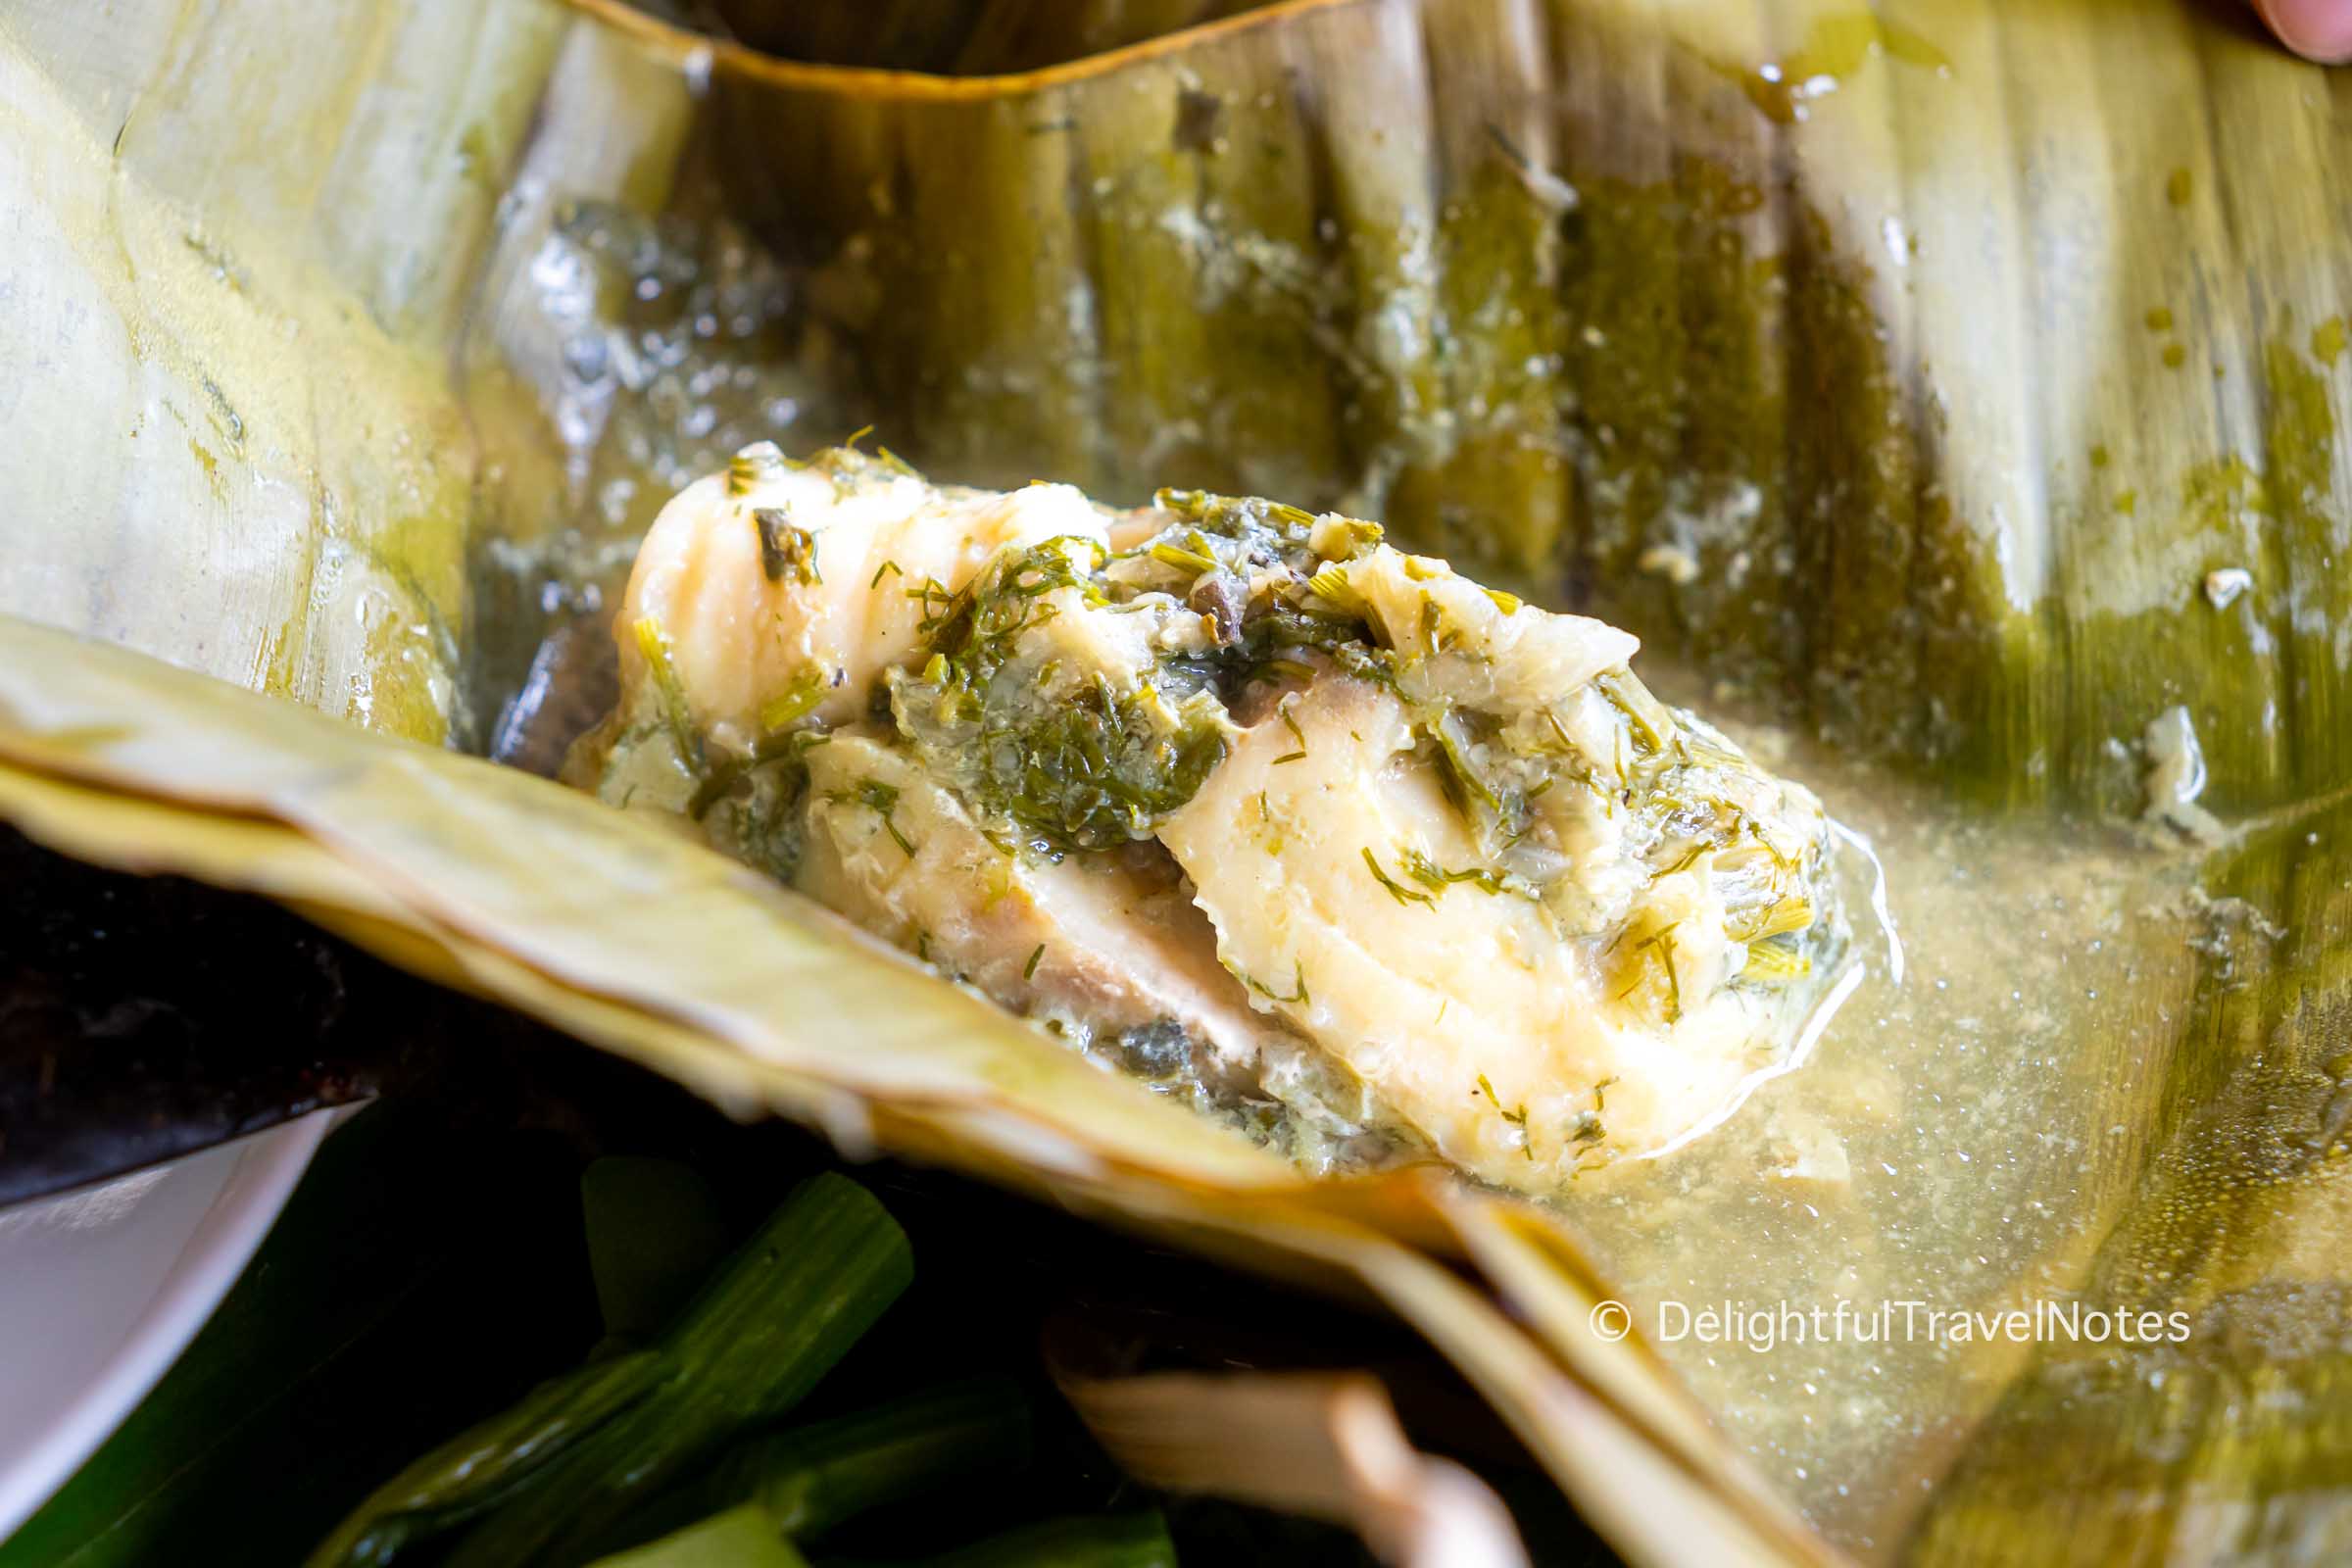 mok pa steam fish in banana leaves at Tamarind, one of the best restaurants in Luang Prabang.